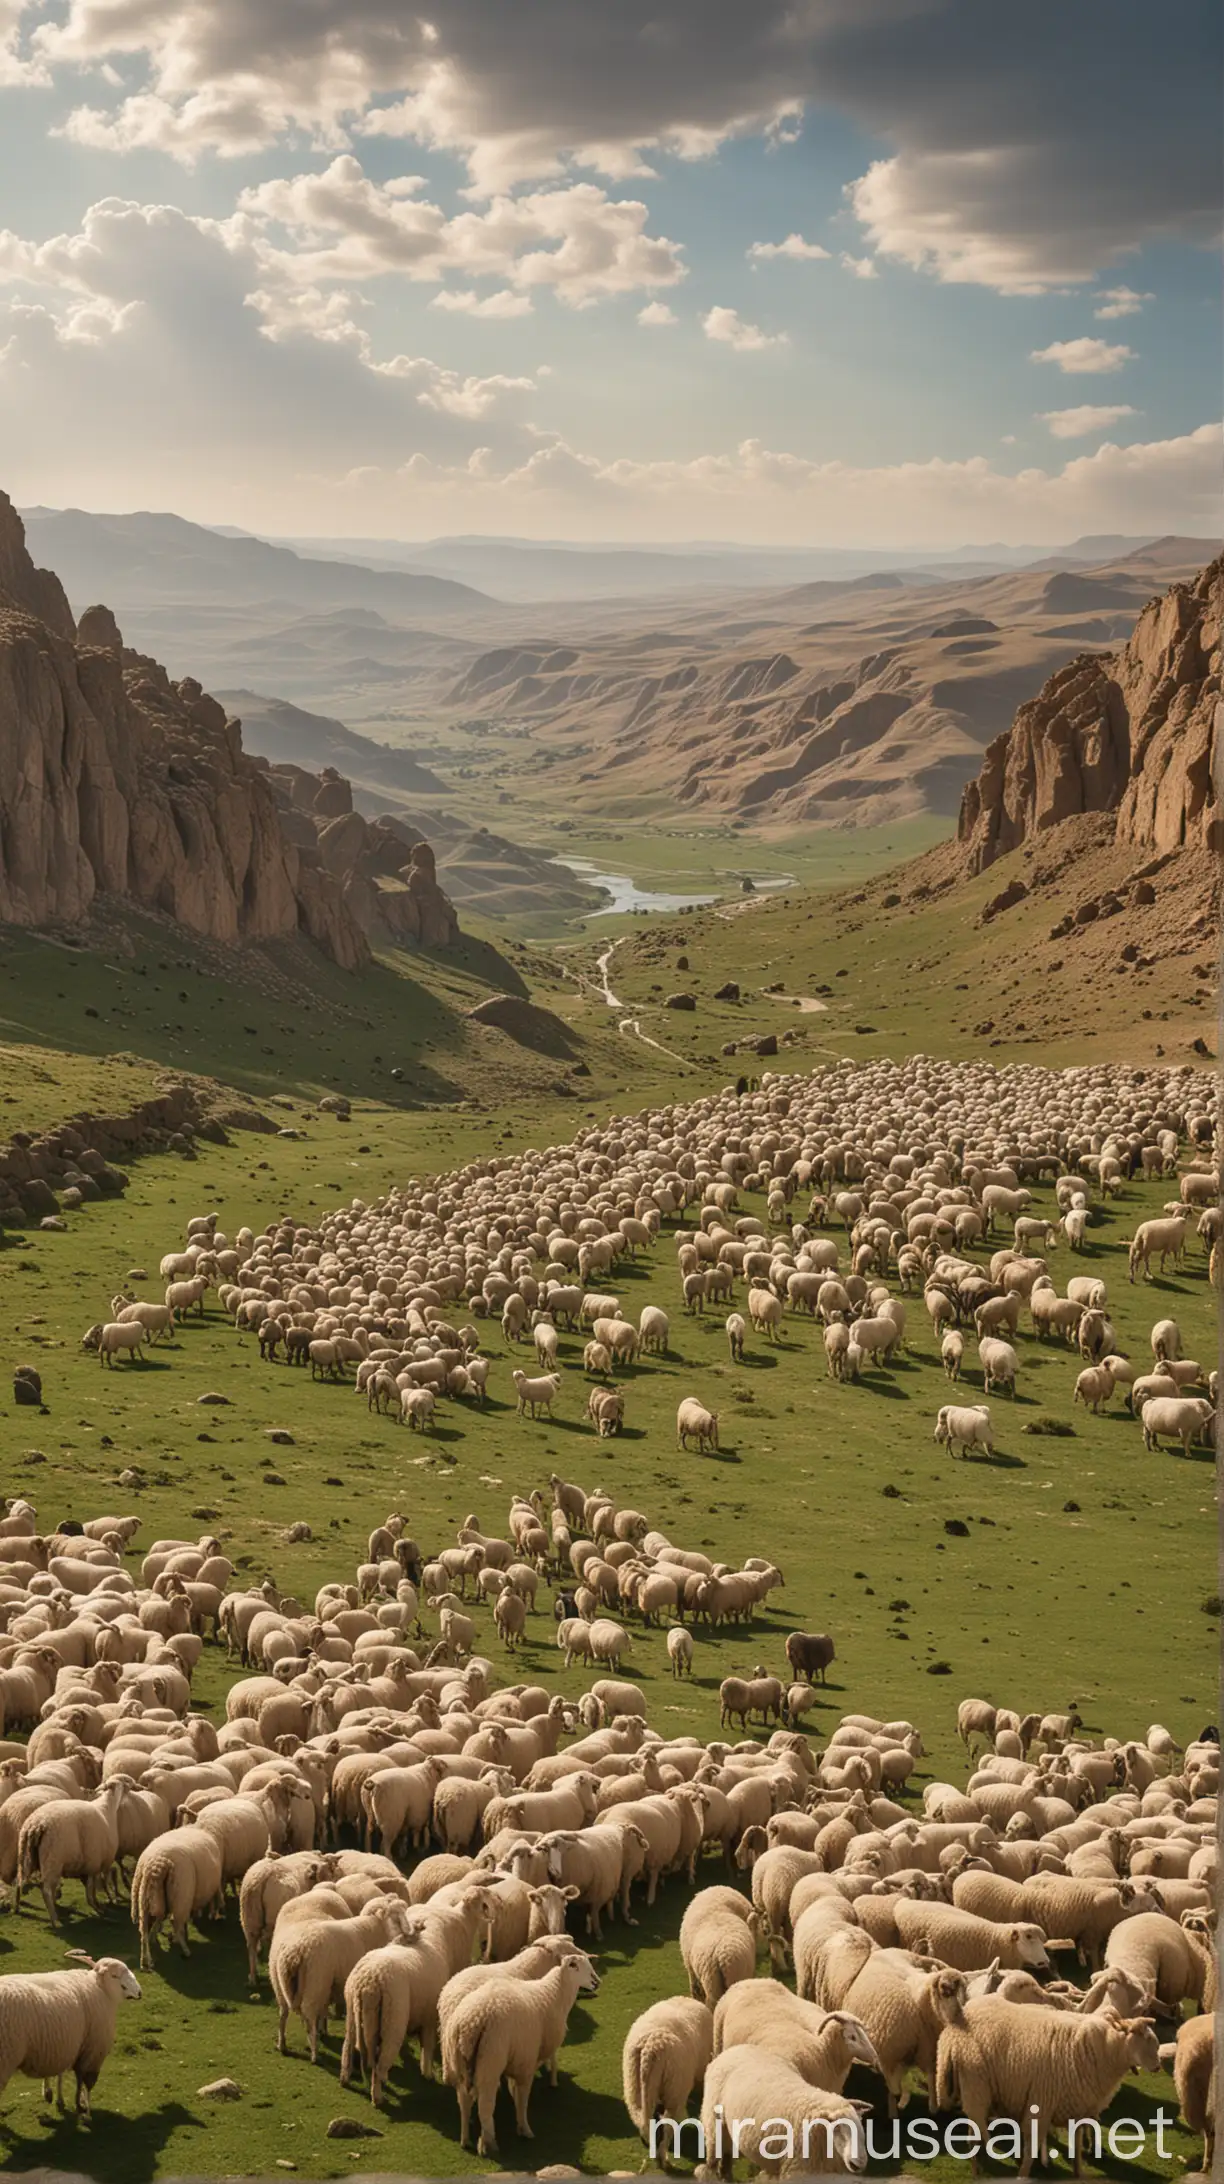 A wealthy landowner's estate with a vast flock of sheep and goats, with Nabal standing in the center, looking out over his lands in ancient world 